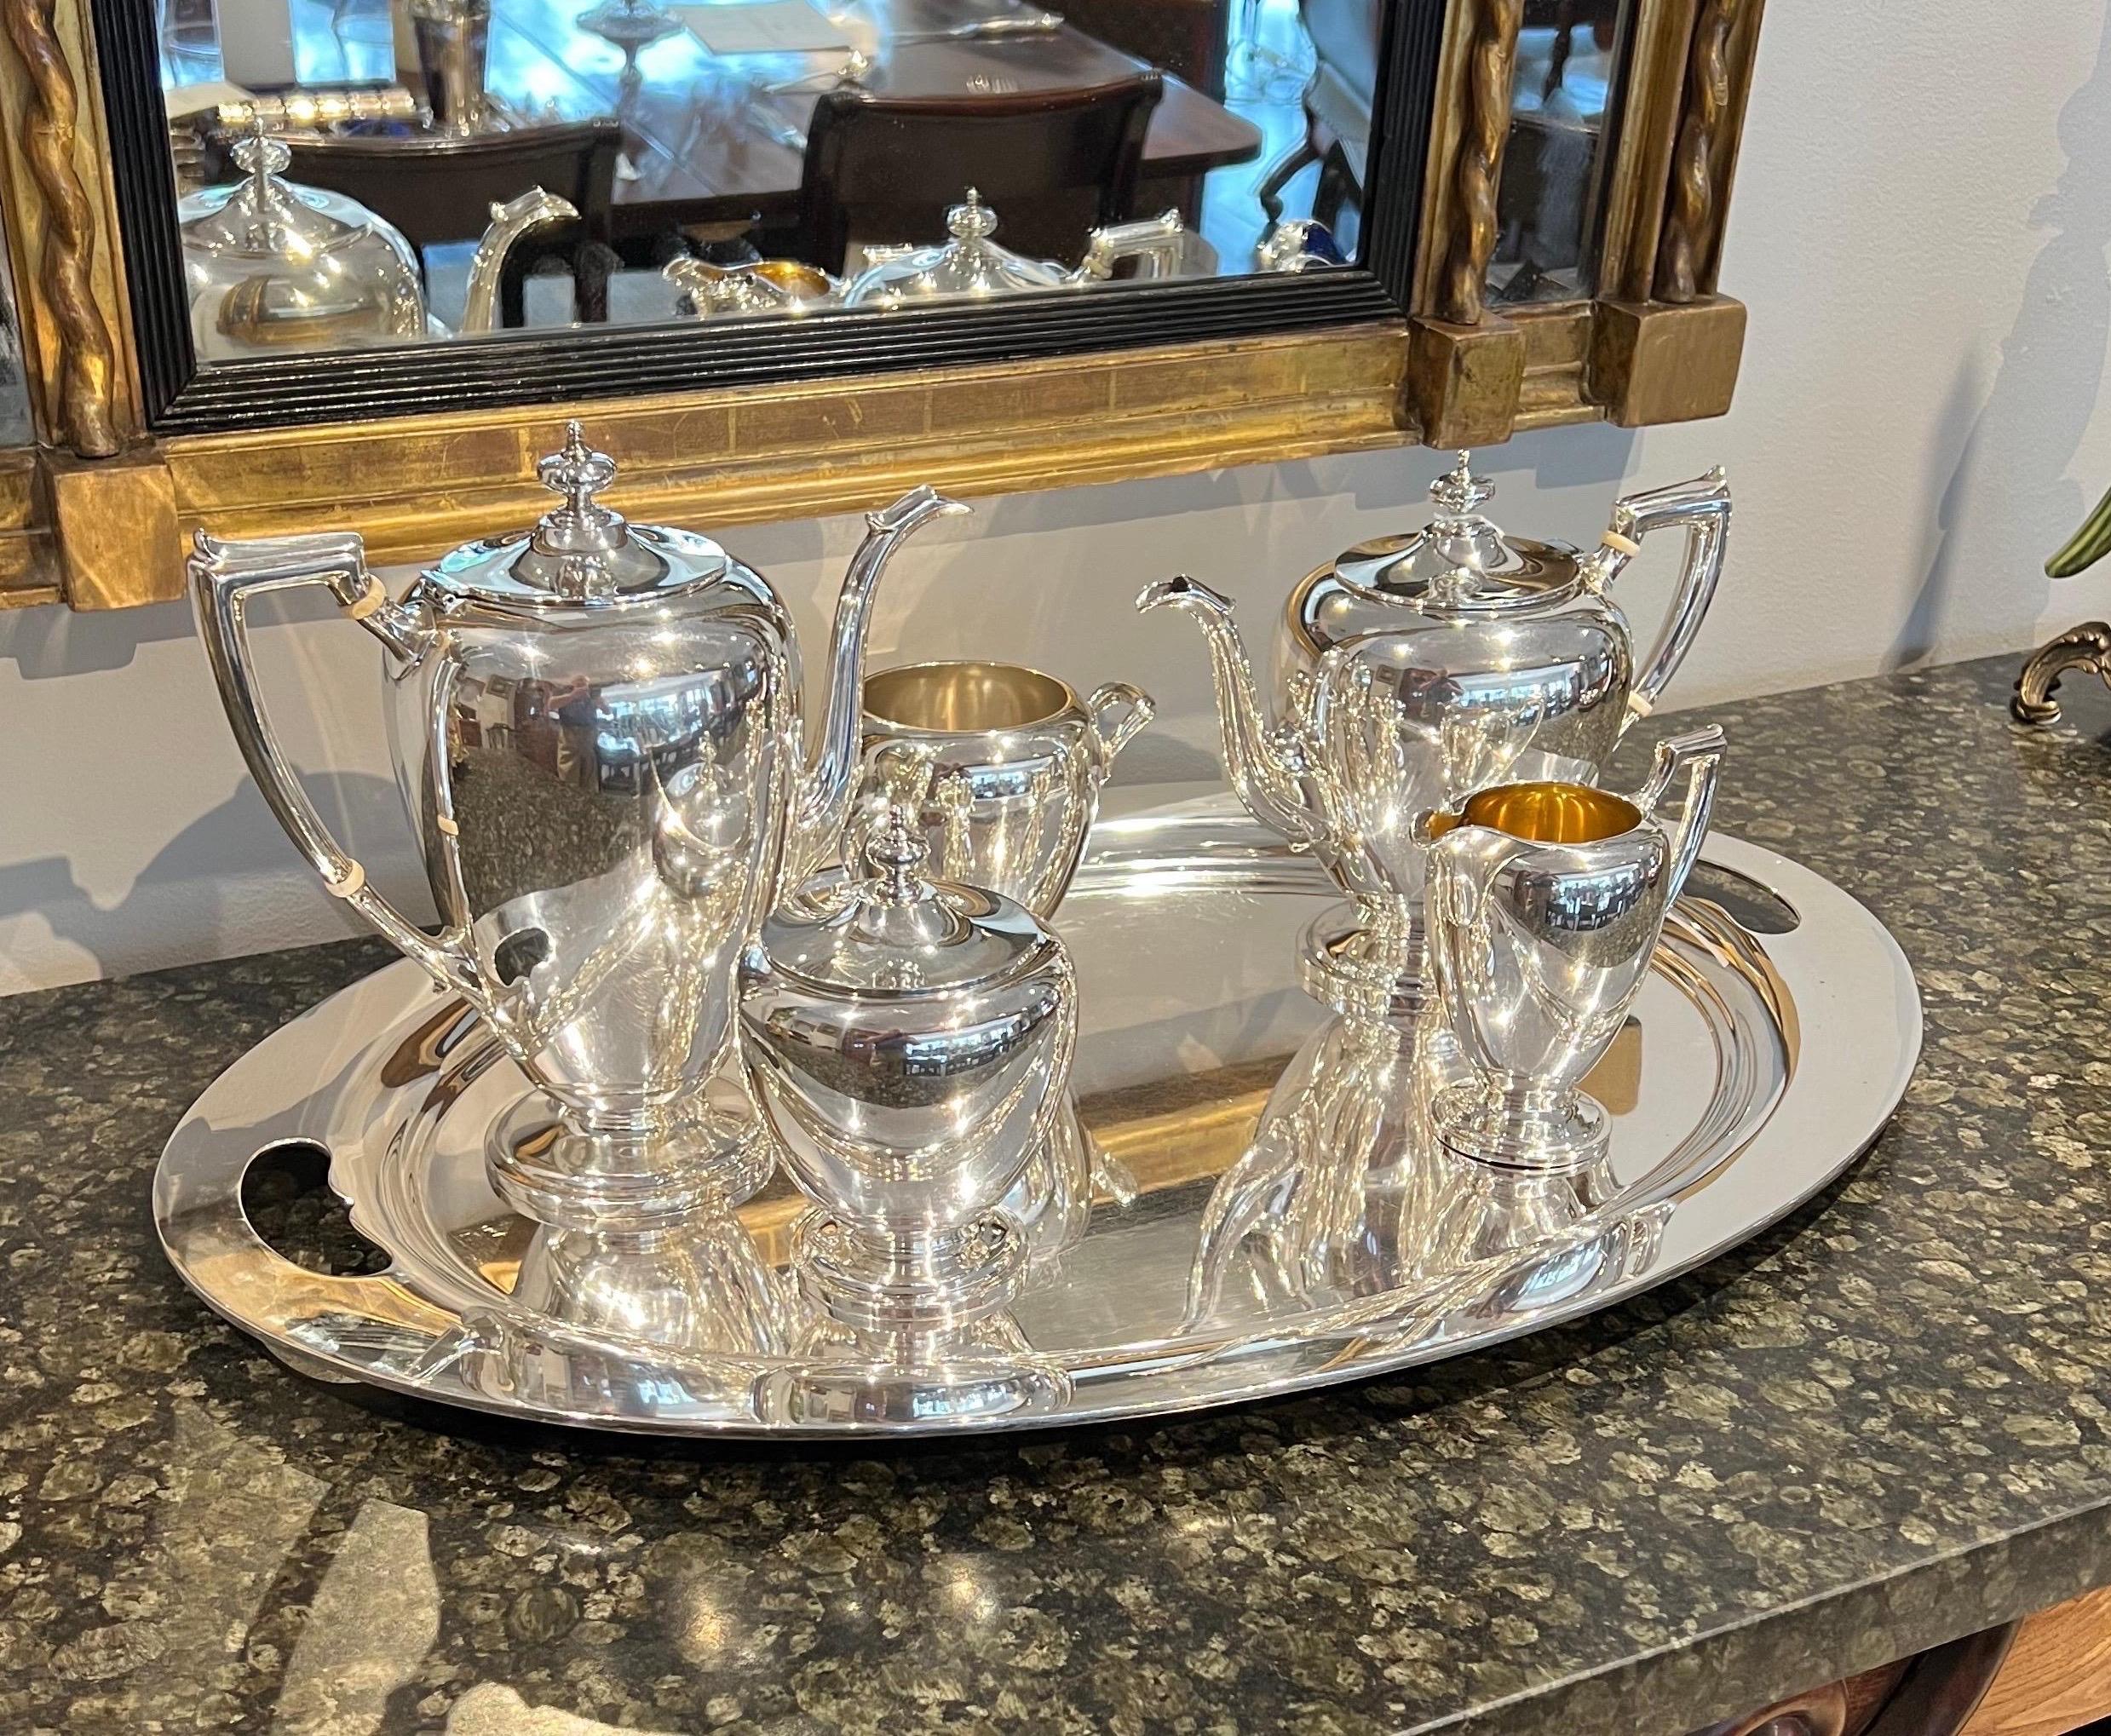 Polished Dominick & Haff Sterling Silver Coffee And Tea Service with Tray circa 1895